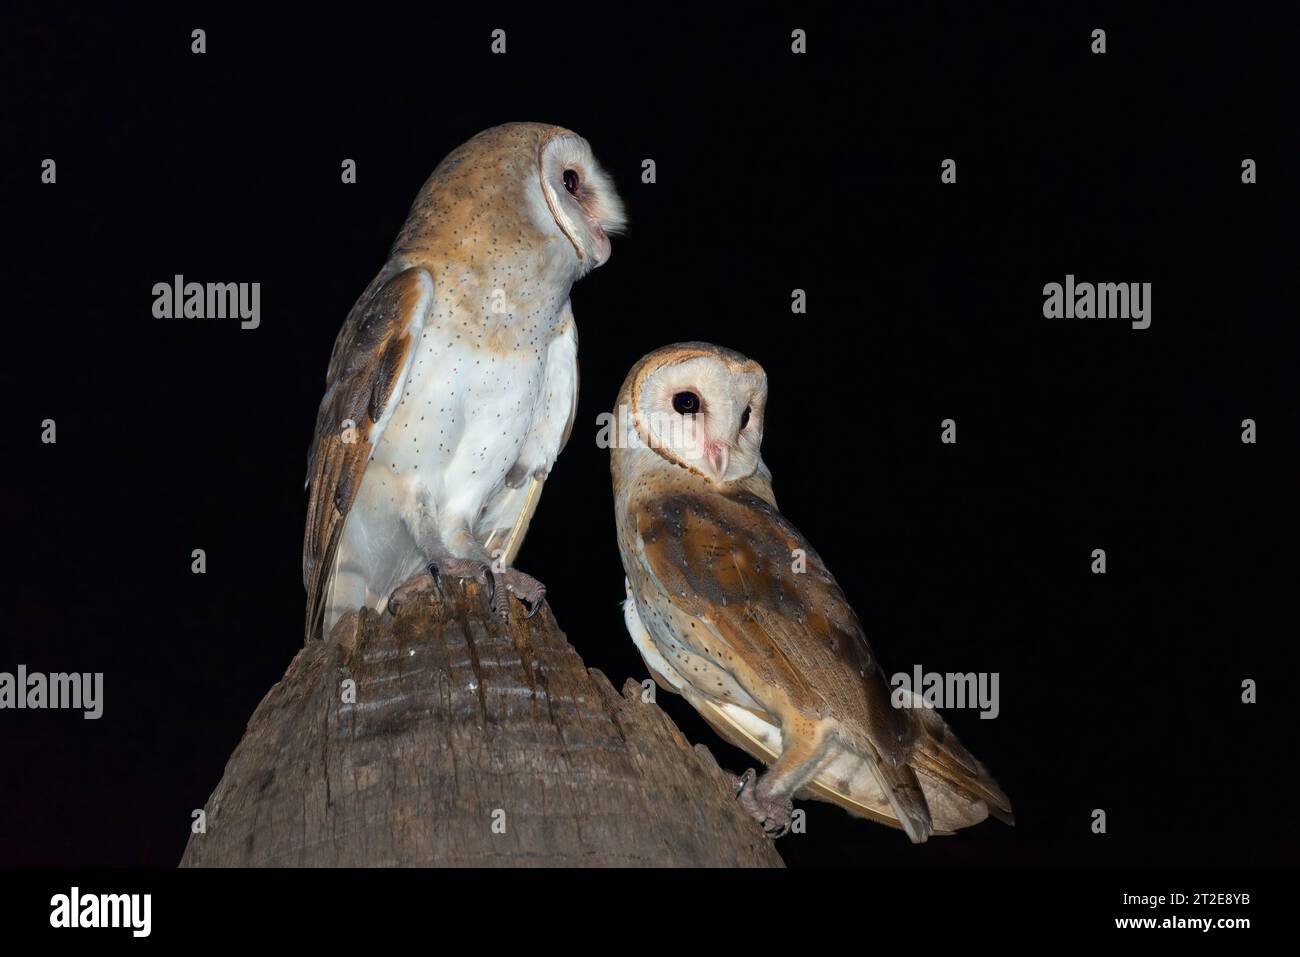 The owls look out ready to hunt CHANDIGARH, INDIA A SNAP of two barn owls creating the perfect heart have been captured.  Images show the barn owls bo Stock Photo